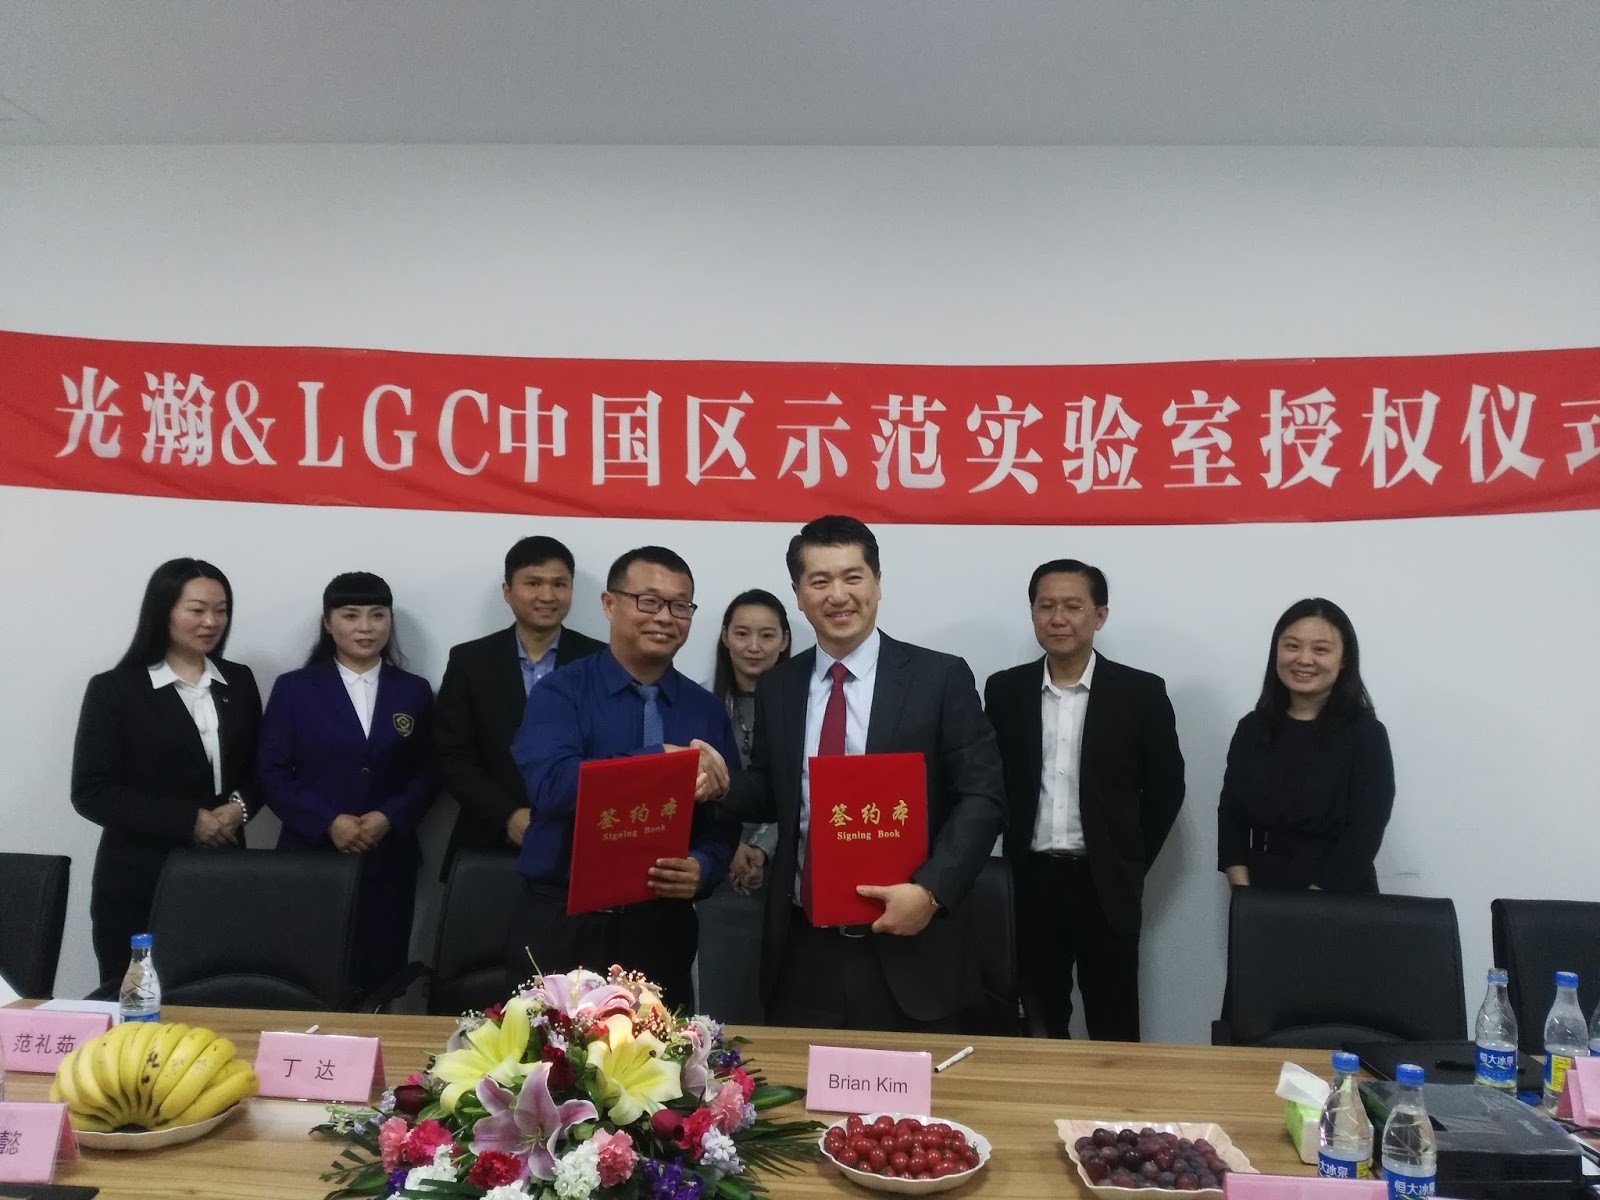 It’s official! Personal Health becomes first China demonstration laboratory site for LGC’s Nexar System